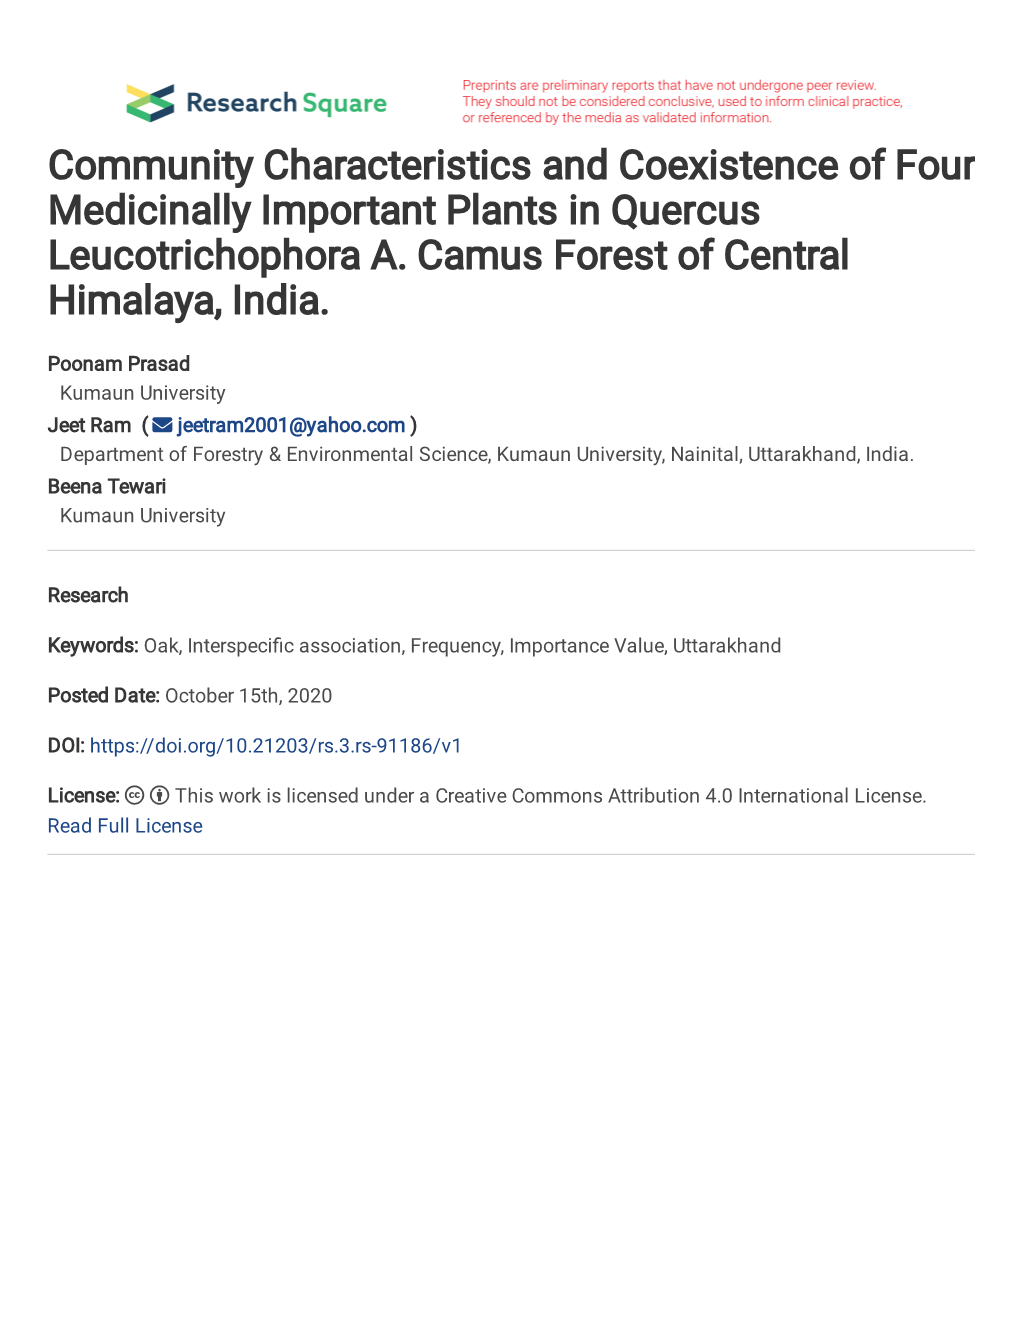 Community Characteristics and Coexistence of Four Medicinally Important Plants in Quercus Leucotrichophora A